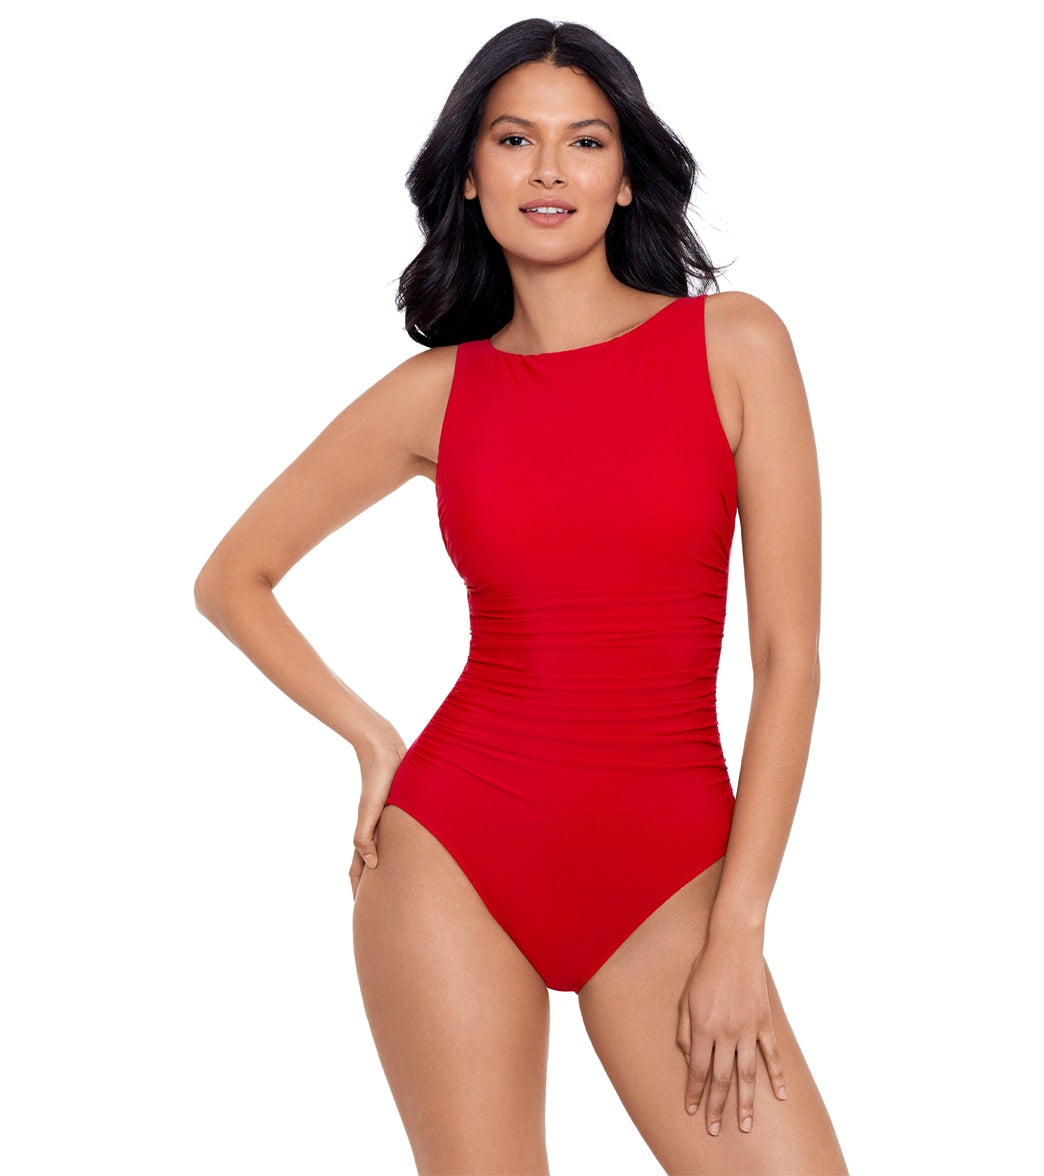 Miraclesuit Women's Rock Solid Regatta One Piece Swimsuit at